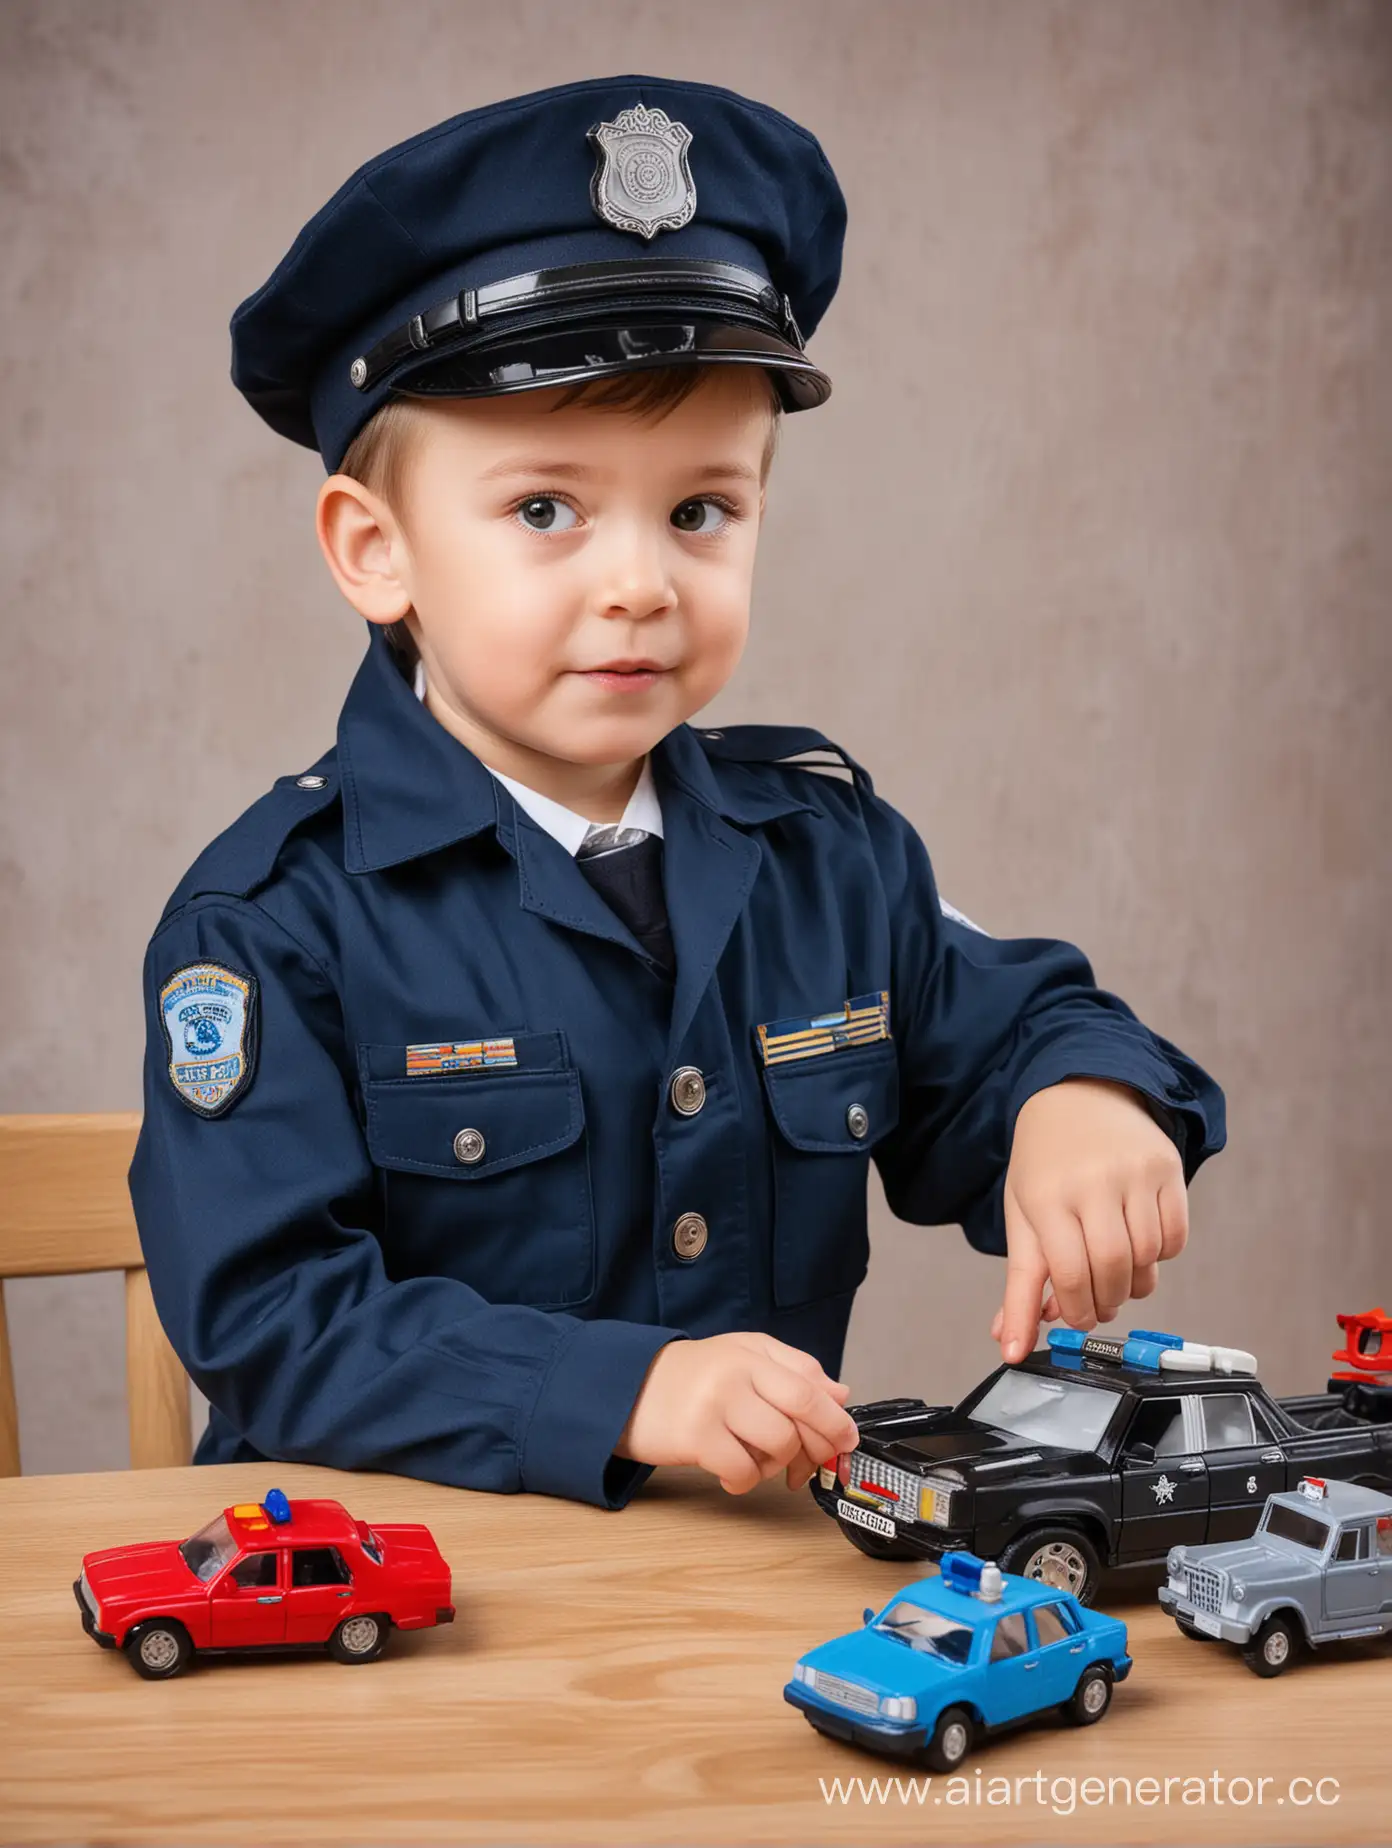 Young-Child-Police-Officer-Playing-with-Toy-Cars-at-Table